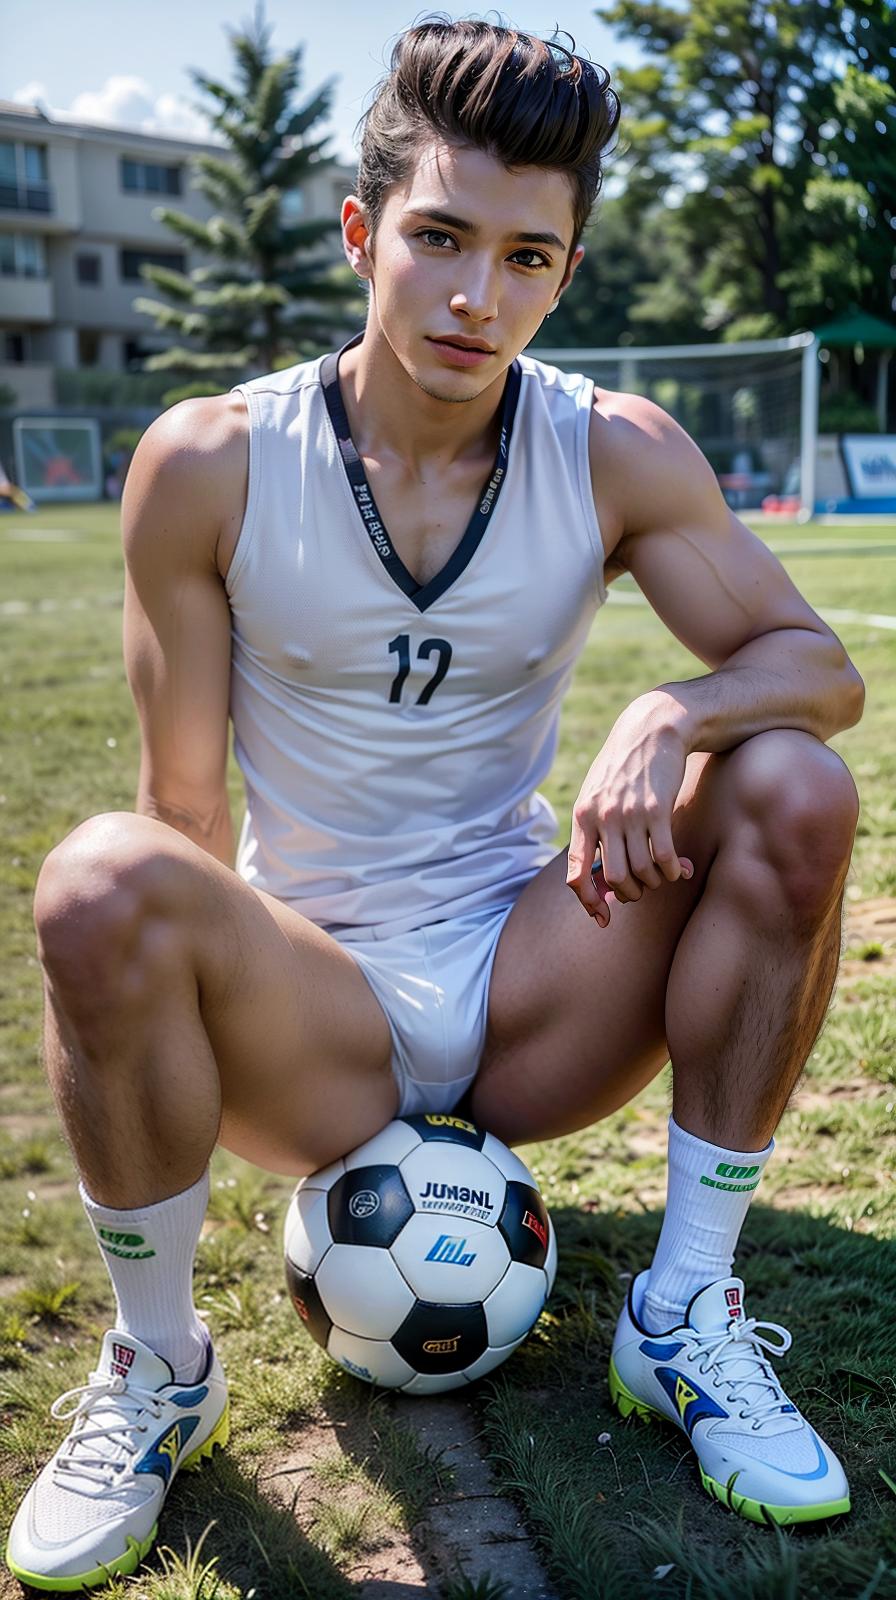  ultra high res, (photorealistic:1.4), raw photo, (realistic face), realistic eyes, (realistic skin), <lora:XXMix9_v20LoRa:0.8>, (handsome:1.1), (male:2.5), (soccer players:1.1), (pompadour:1.4), (white briefs:1.3), (sleeveless:1.2), spike shoes, (soccer shin guards:1.3), young, sitting posture, (spread legs:1.1), real skin, (sexy posing:1.3), hot guy, (muscular:1.3), (naked:1.1), (bulge:1.1), trained calves, thigh, realistic, lifelike, high quality, photos taken with a single-lens reflex camera, (looking at the camera:1.2)